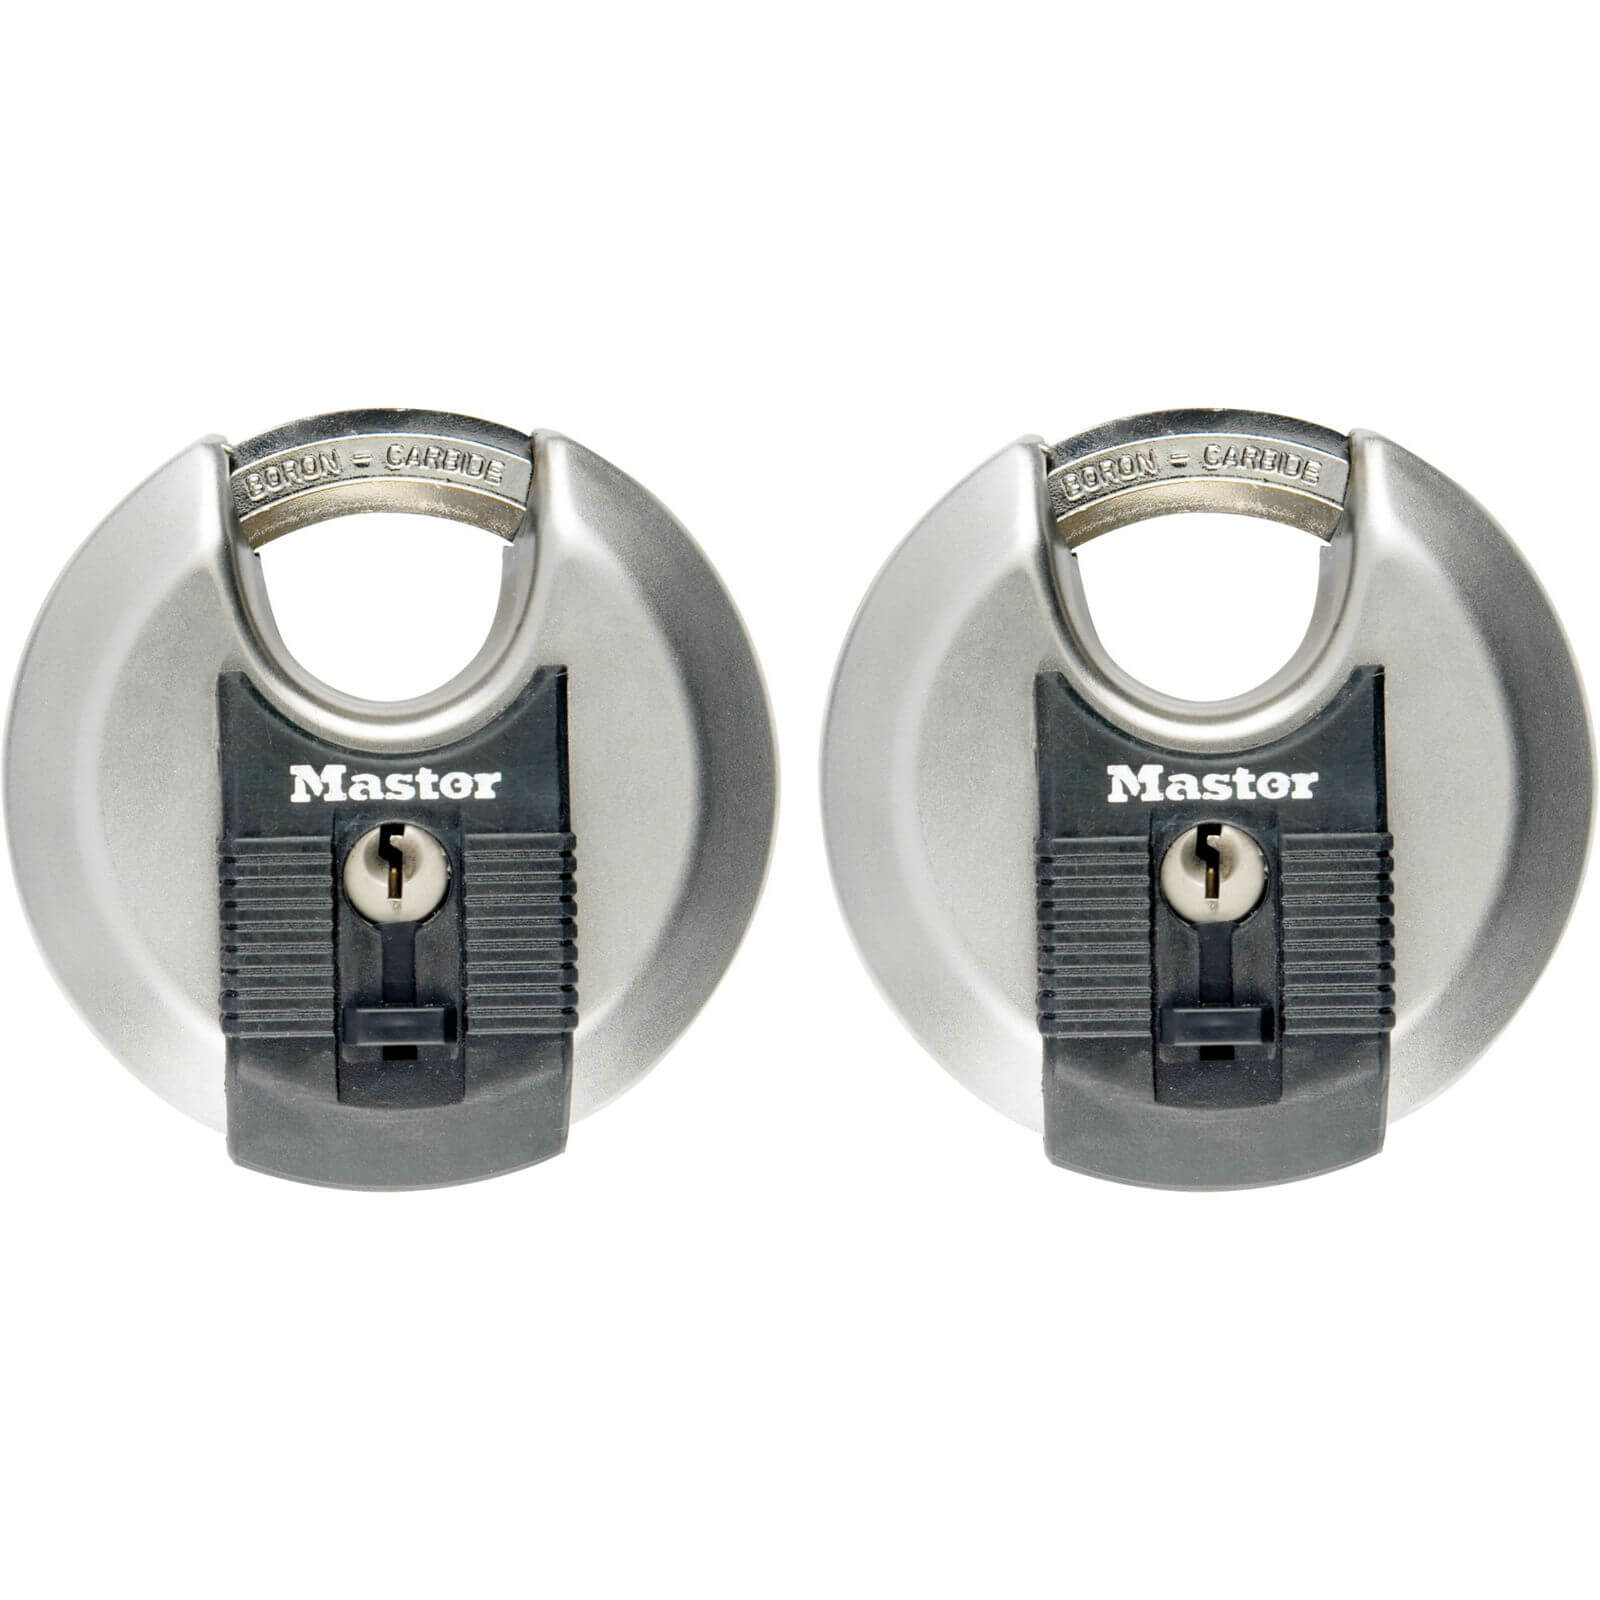 Master Lock Excell Discus Padlock - 70mm - 2 Pack